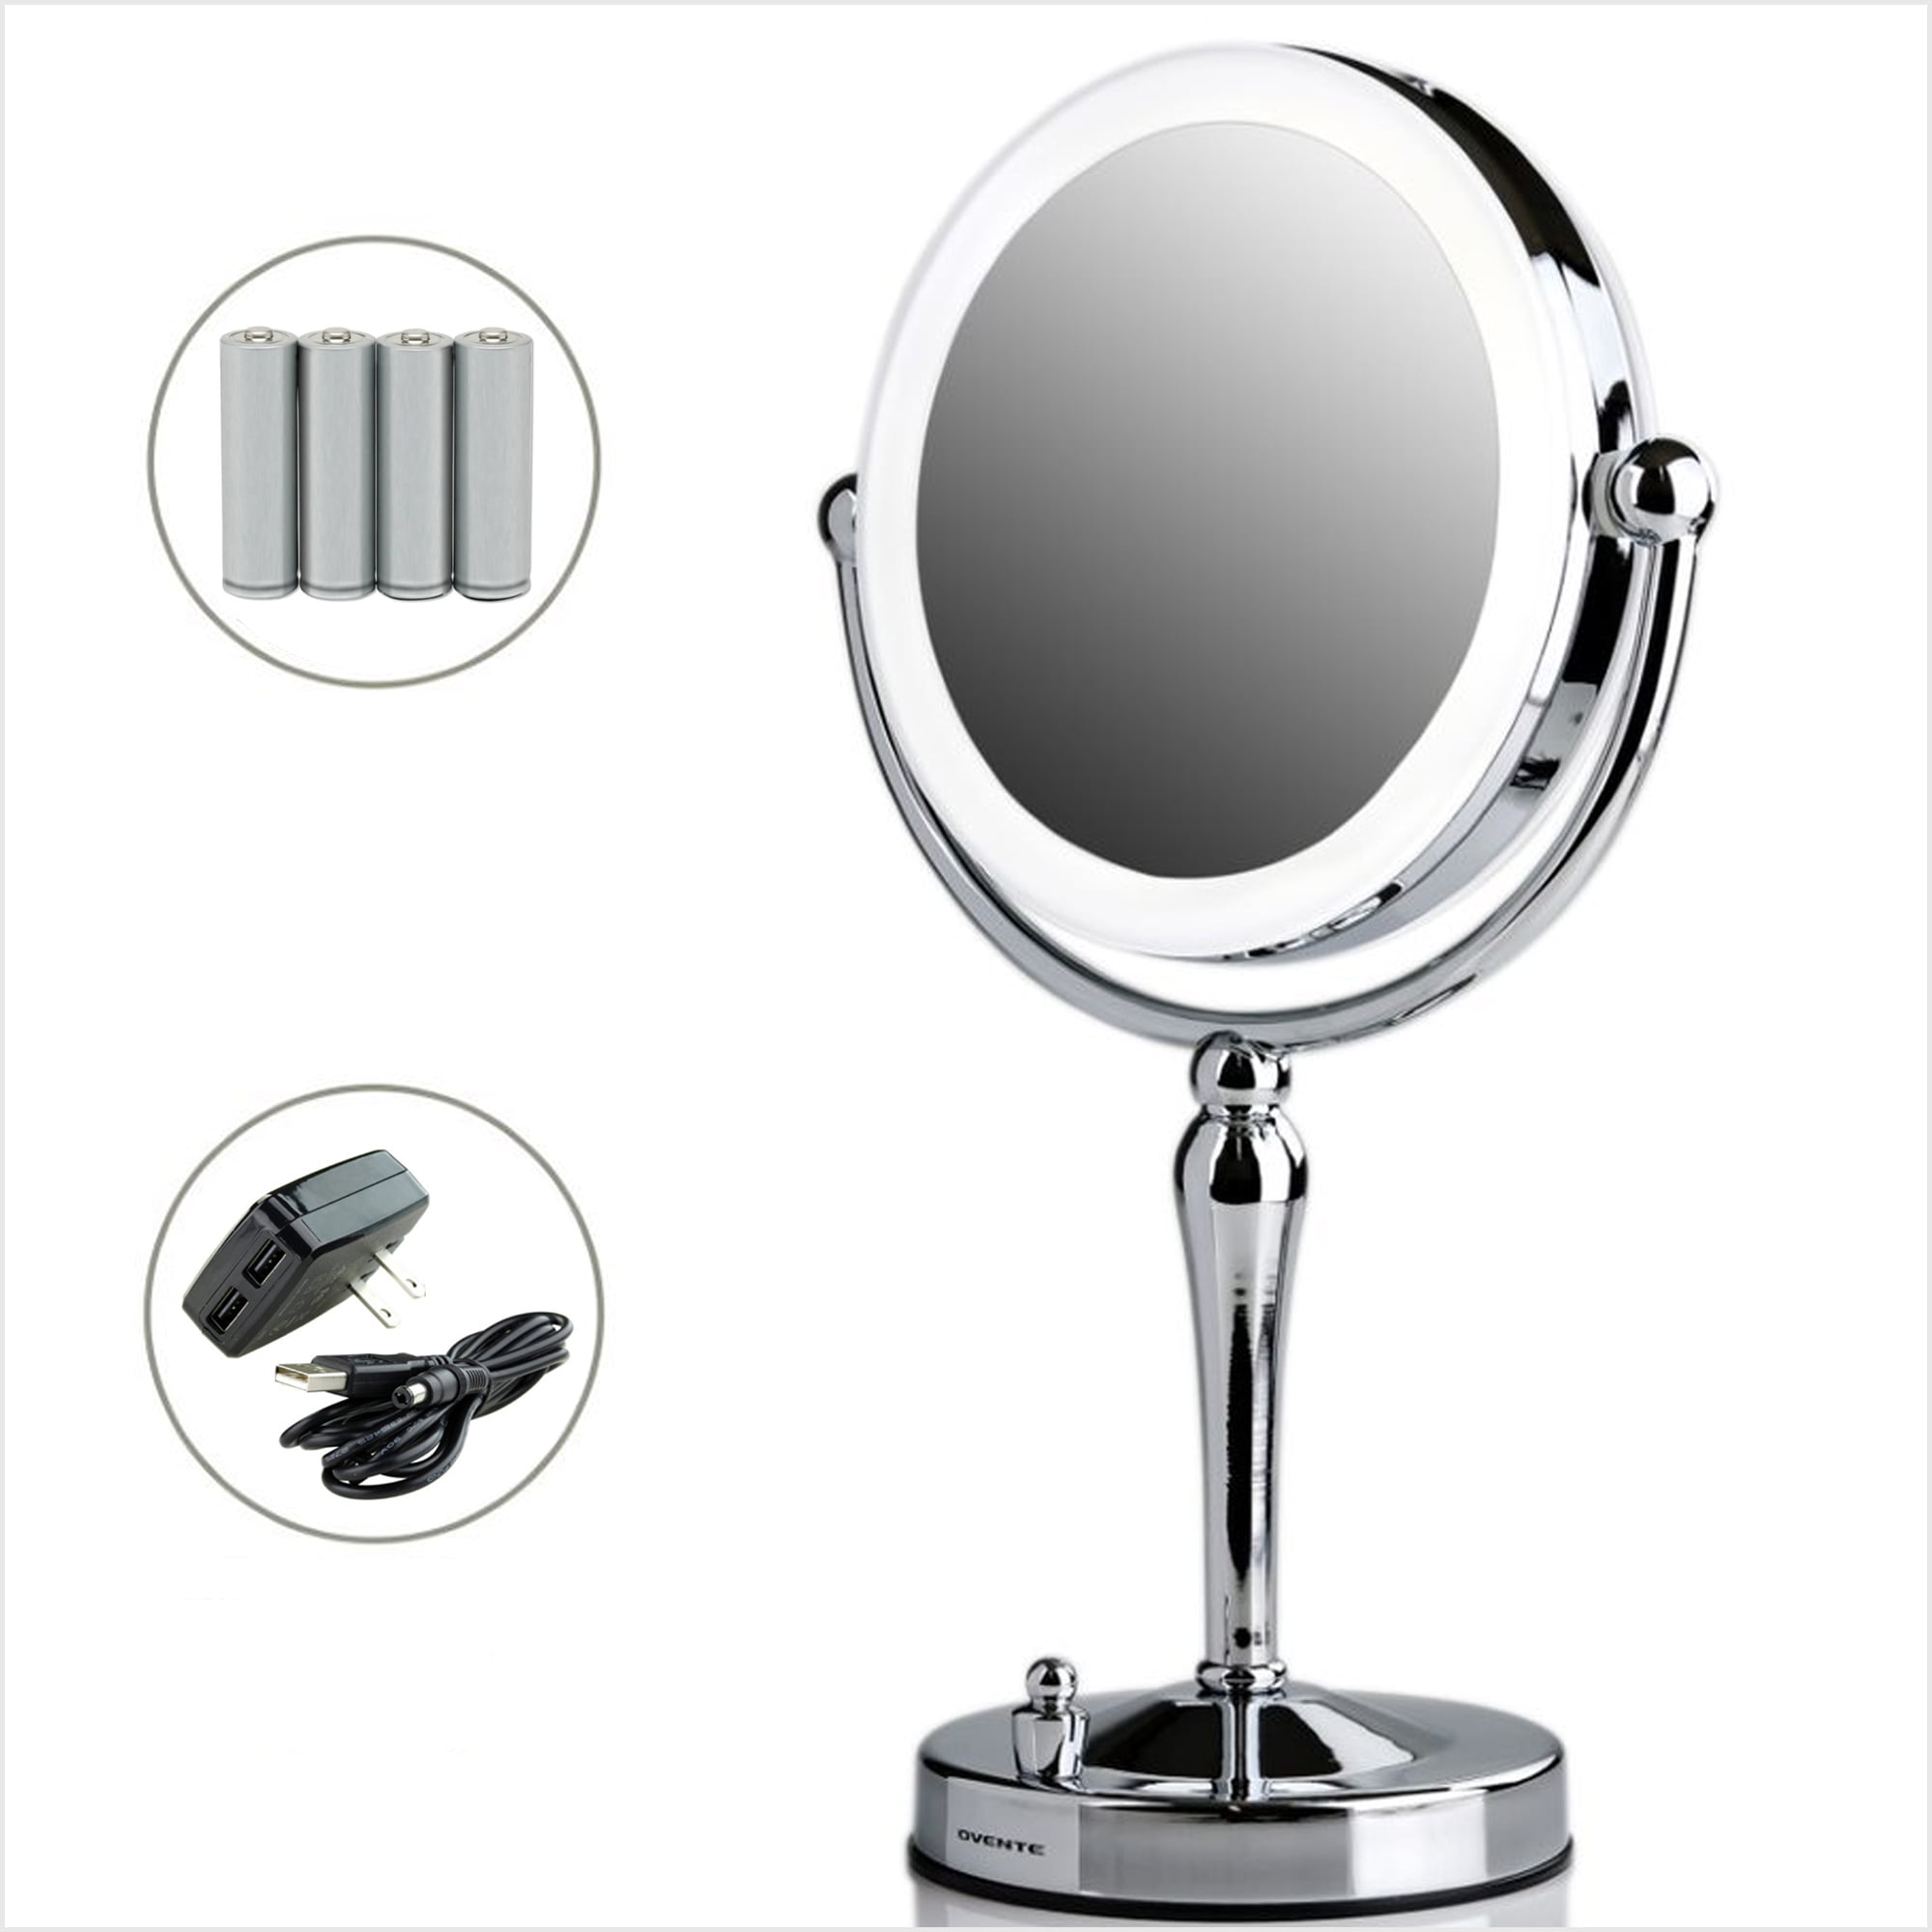 Makeup Mirror Led Light Round Foldable Dimmable Live Stand Vanity Diffused Bulbs Makeup Artist Studio Magnifying Ring Lighting Kit 360 Rotating Premium Acrylic Stand USB Phone Holder Dressing Table 